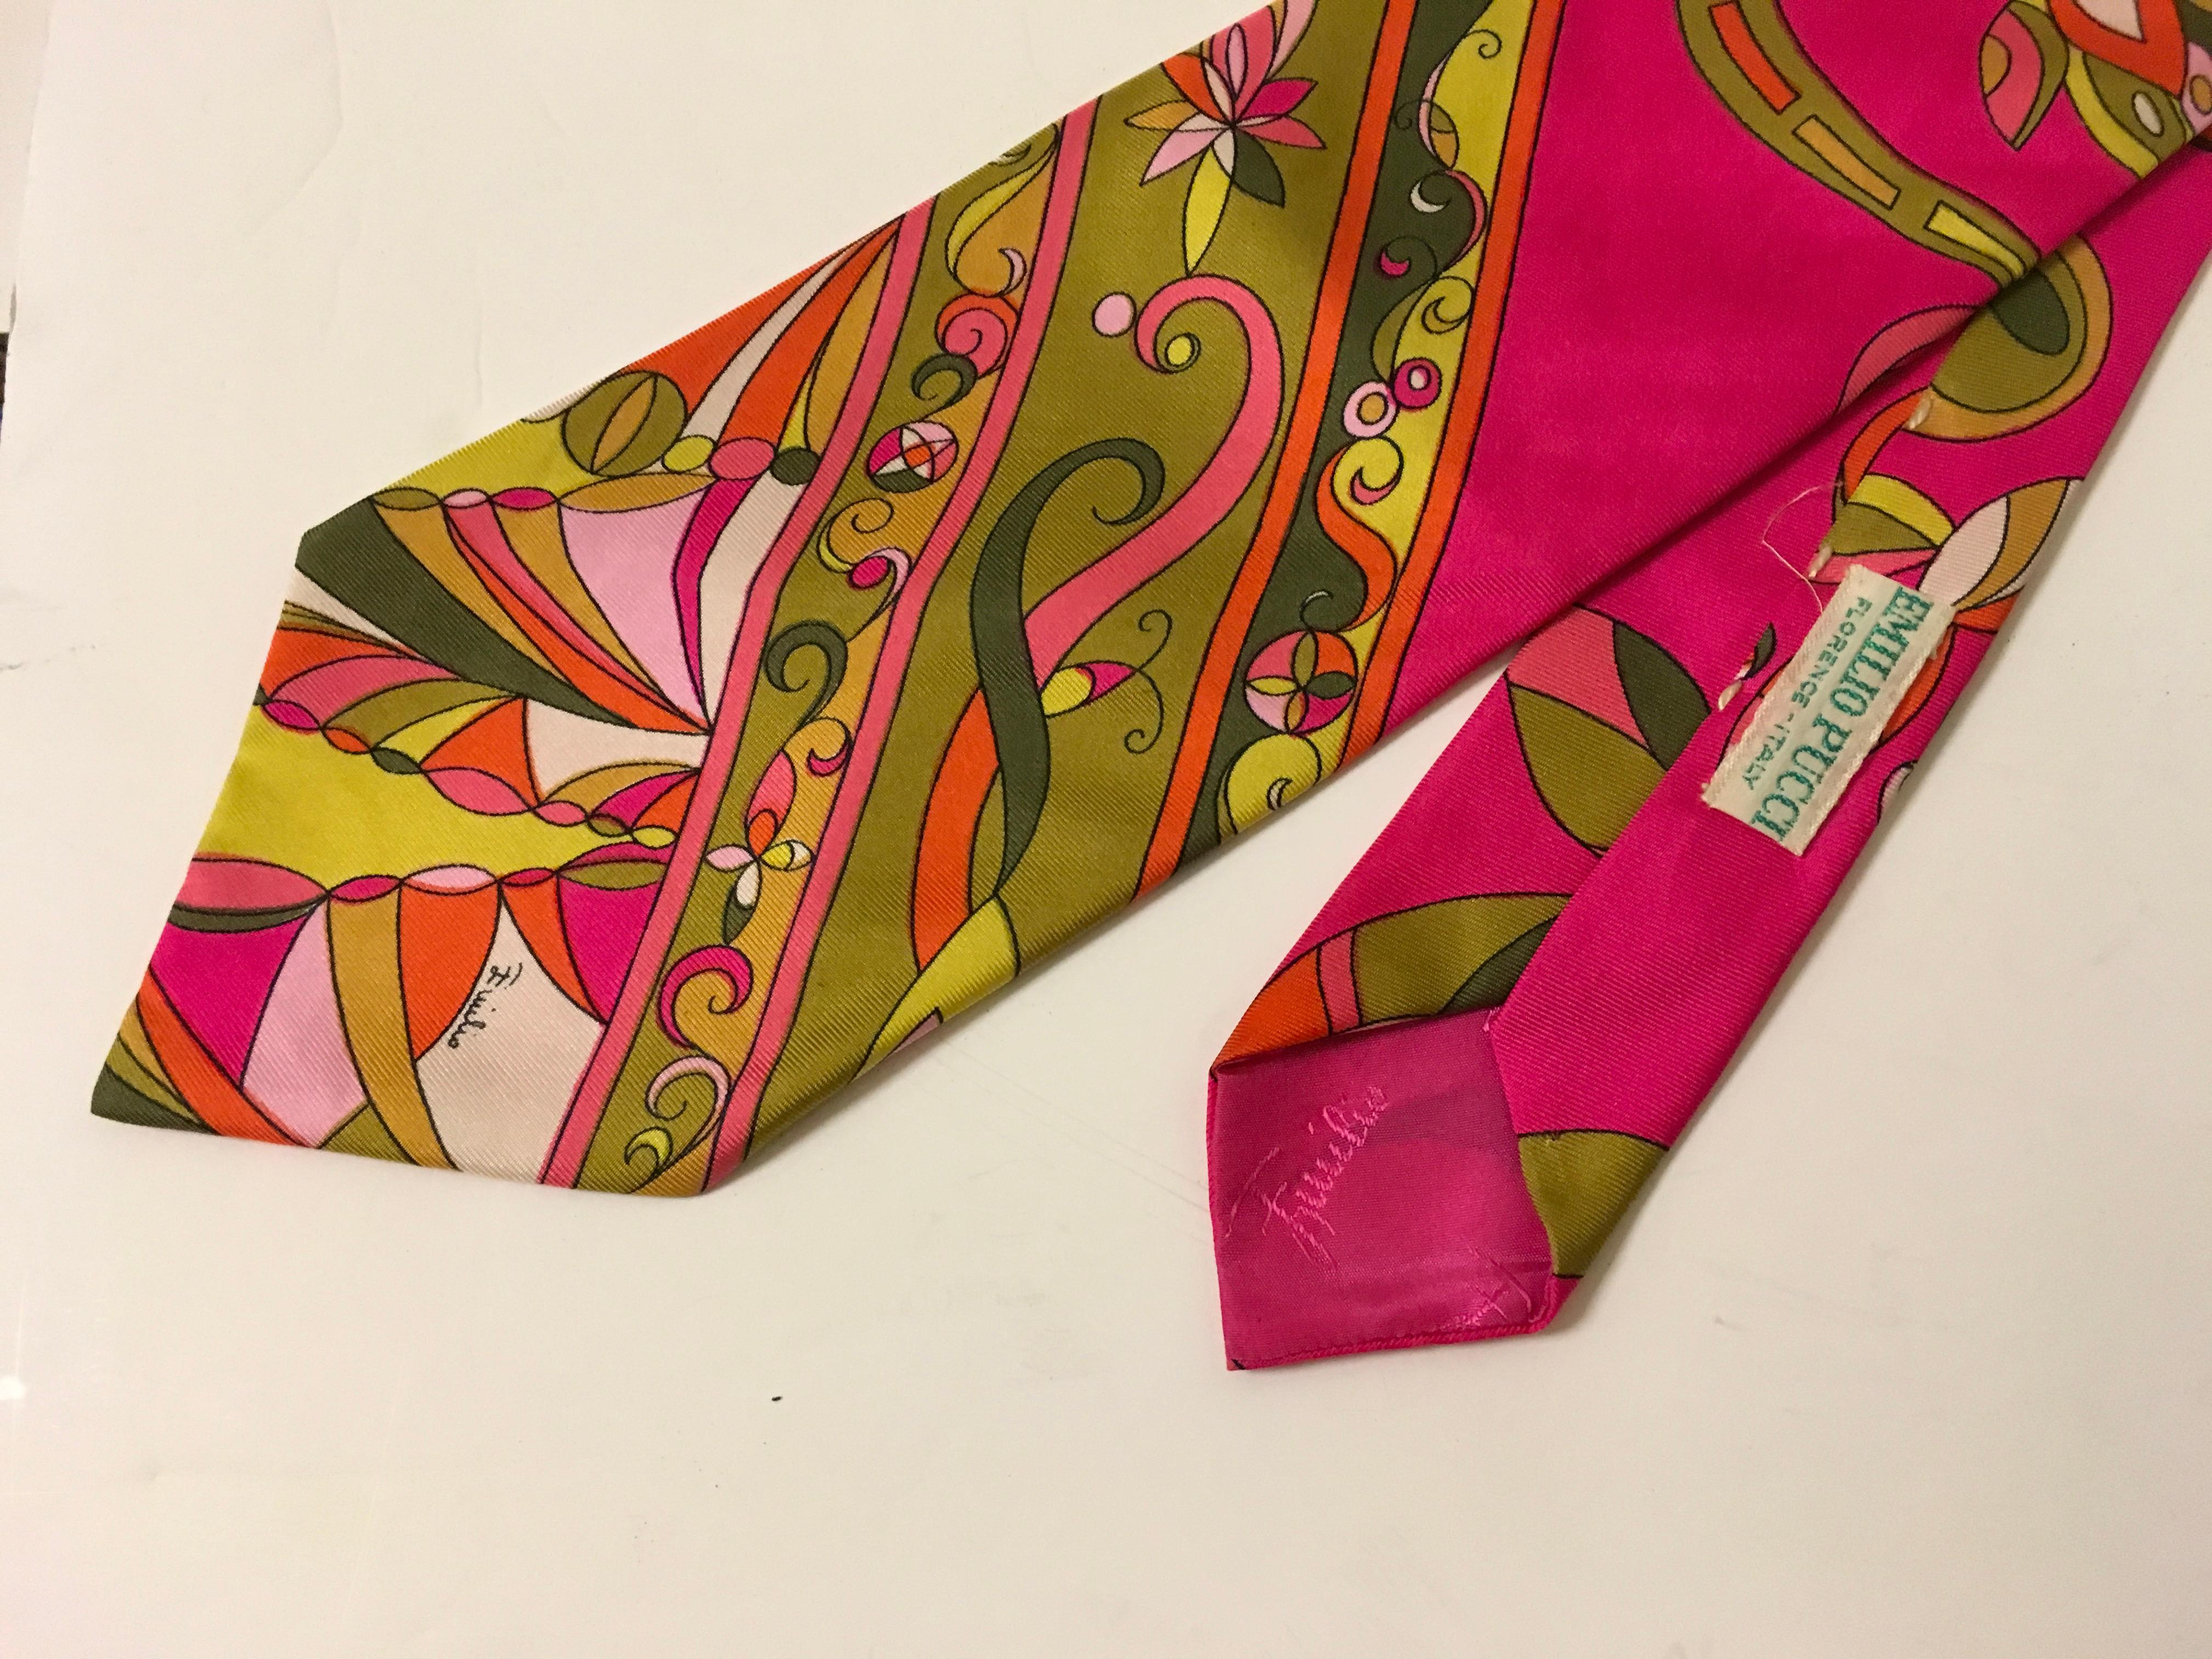 Presented here is an extremely rare treasure. This Pucci tie is from the 1960s. It is very rare that you are able to find a men's Pucci tie from this era in such excellent condition. The tie encompasses a whimsical and beautiful color tone pattern